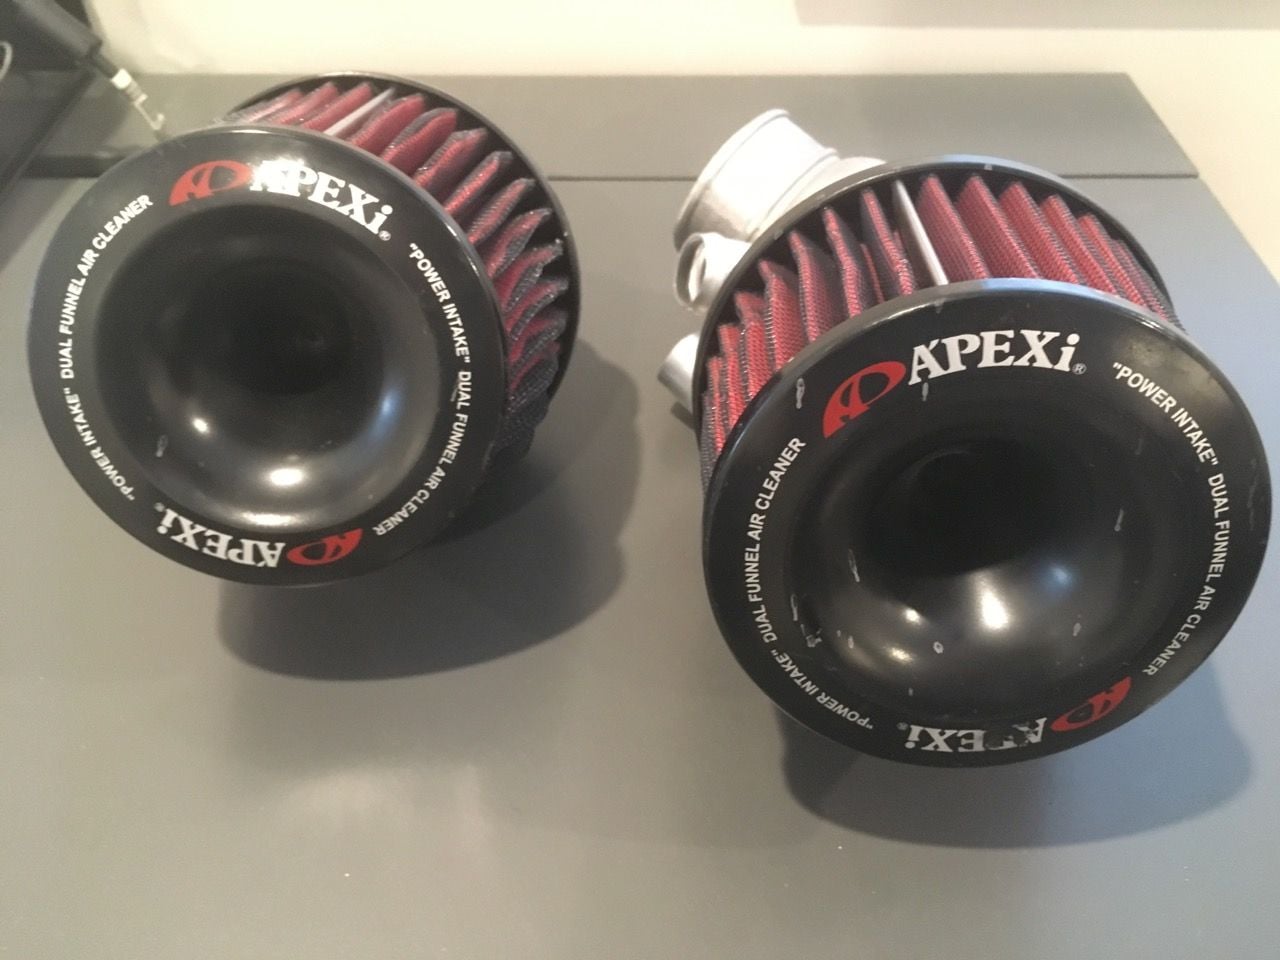 Engine - Intake/Fuel - Used Apexi Power Intake w/ <2k miles (FD) - Used - 1993 to 2002 Mazda RX-7 - Seal Beach, CA 90740, United States